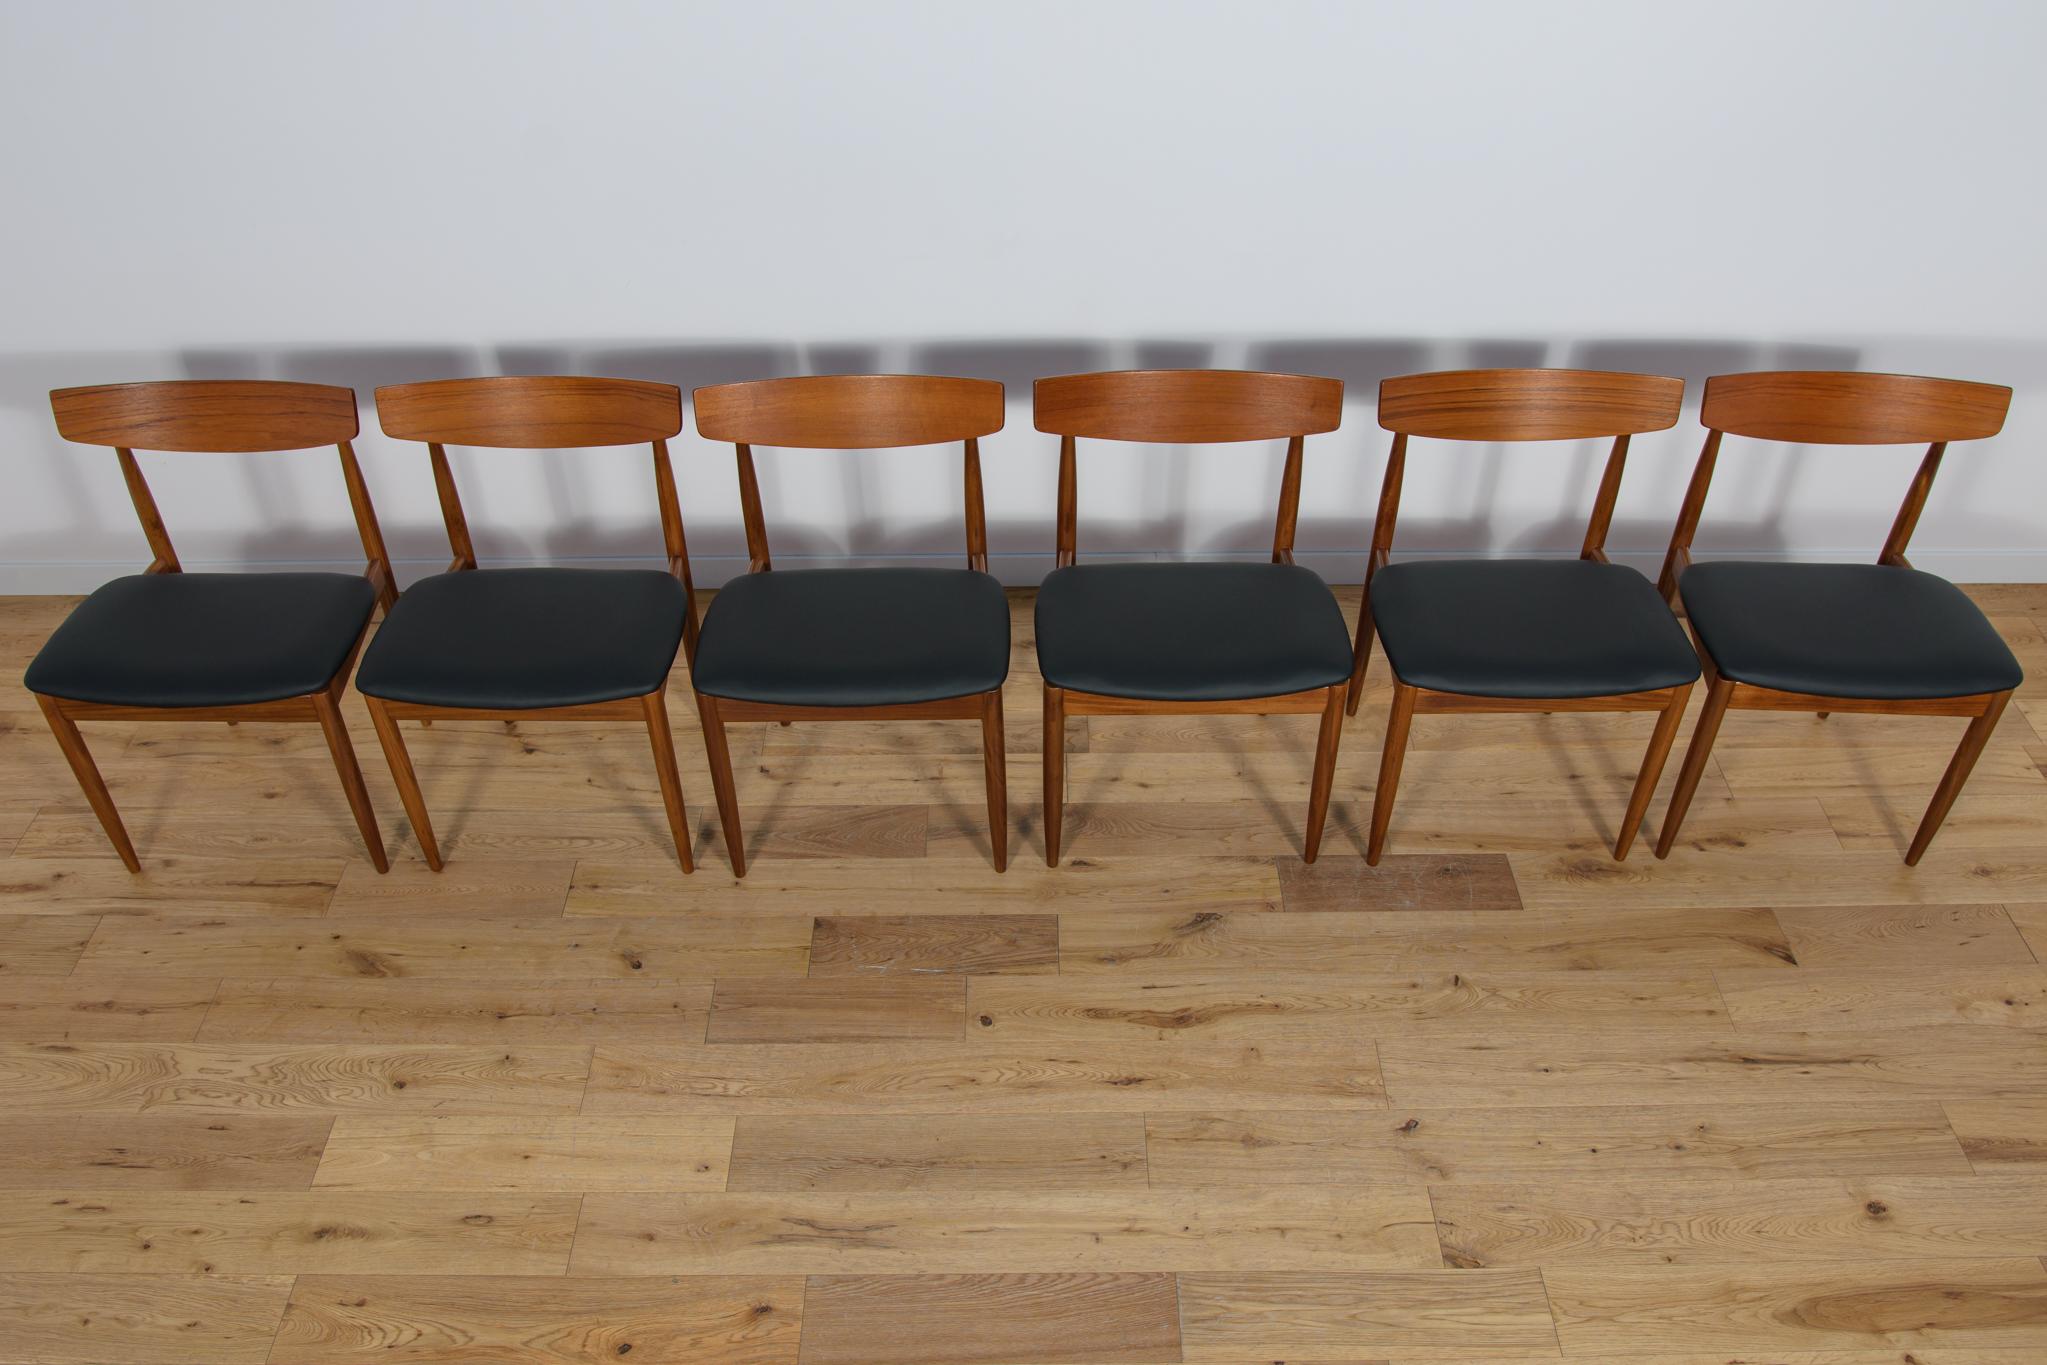 Mid-Century Modern Mid-Century Dining Chairs in Teak by Ib Kofod Larsen for G-Plan, 1960s. For Sale